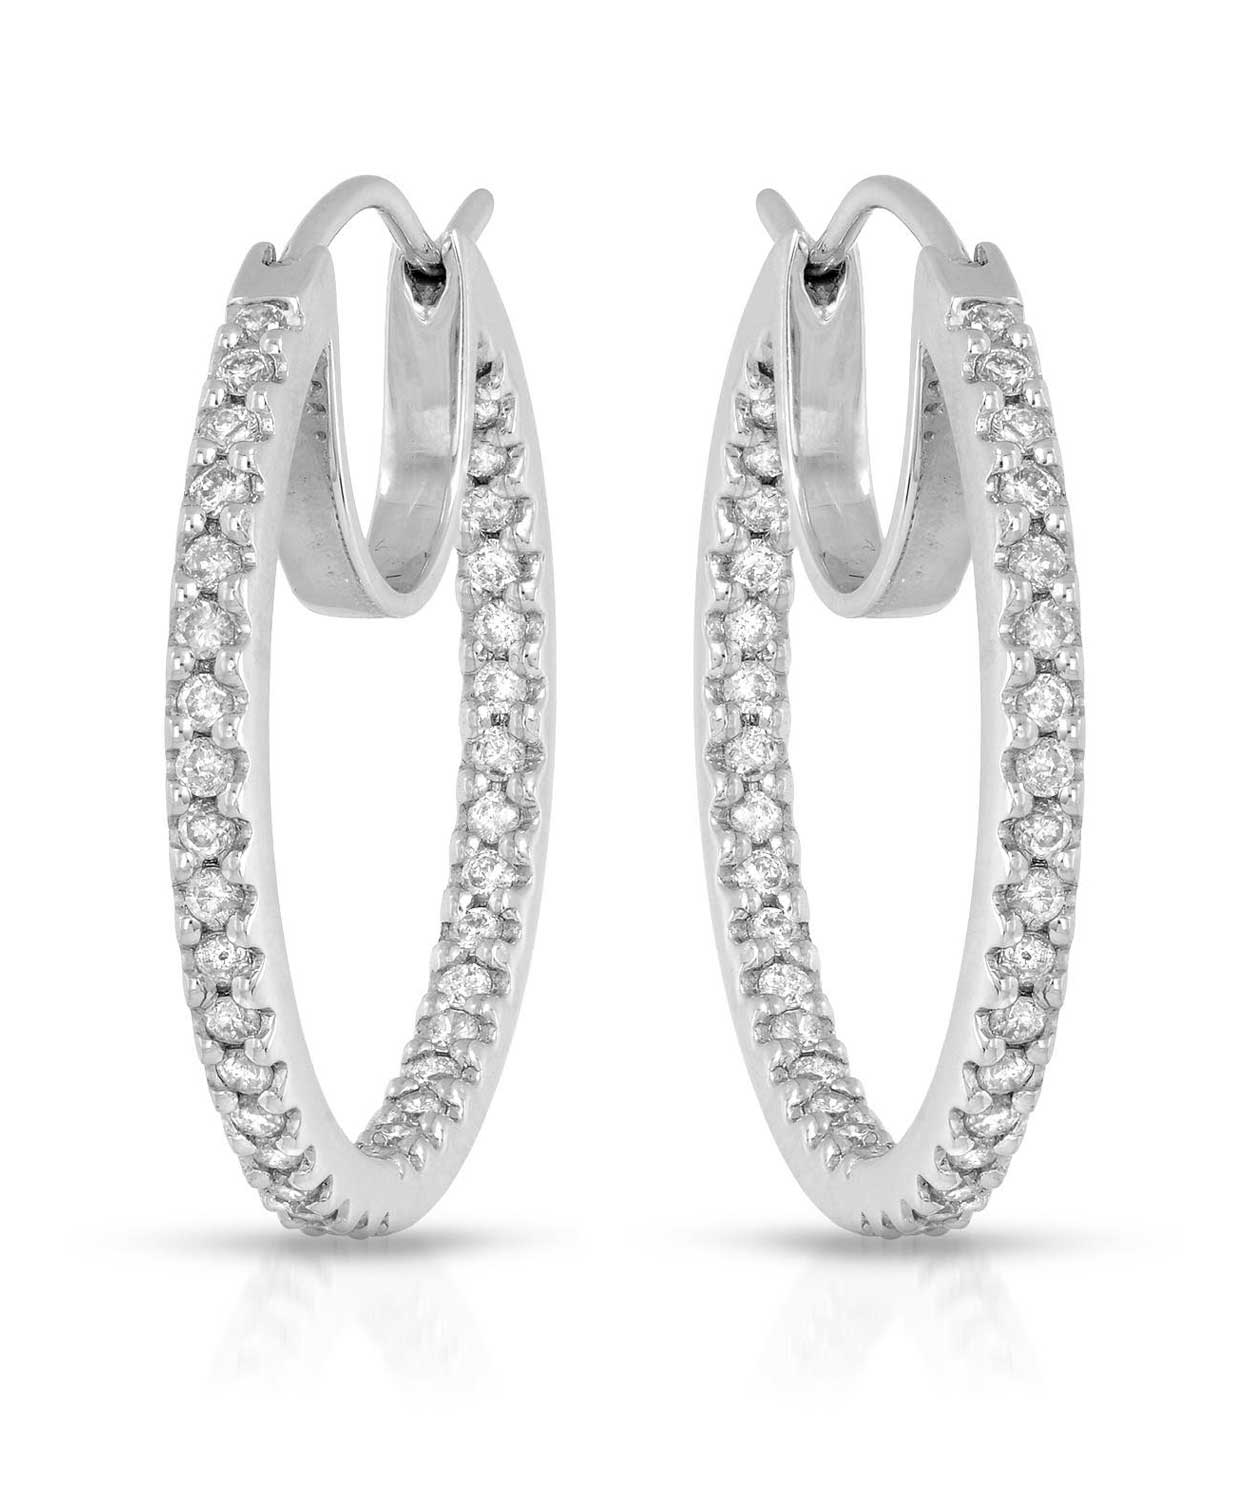 Allure Collection 0.75 ctw Diamond 14k White Gold Inside-Out Hoop Earrings View 1